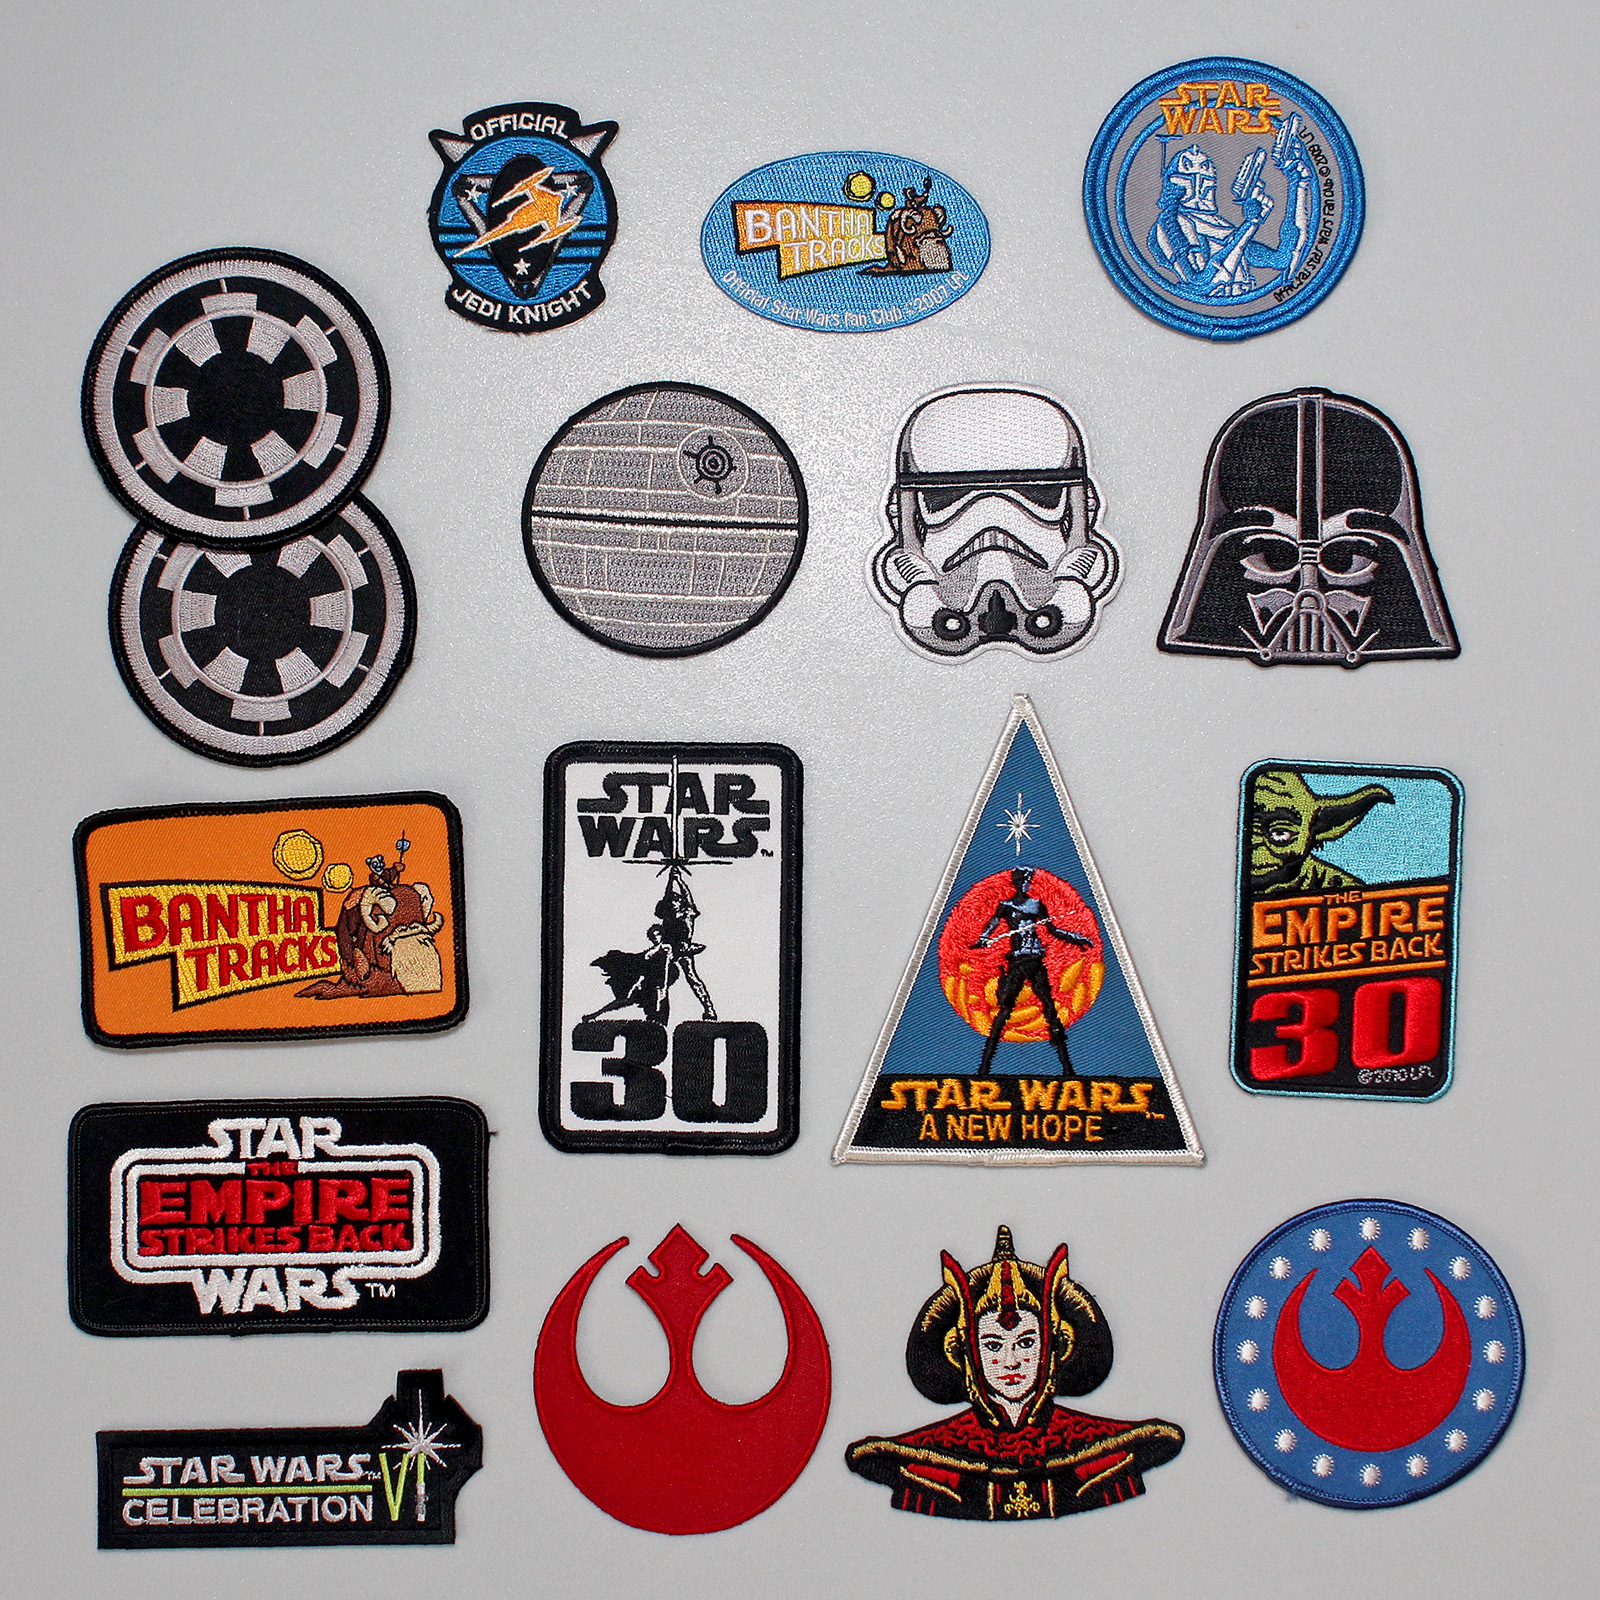 Styling pins and patches - The Kessel Runway